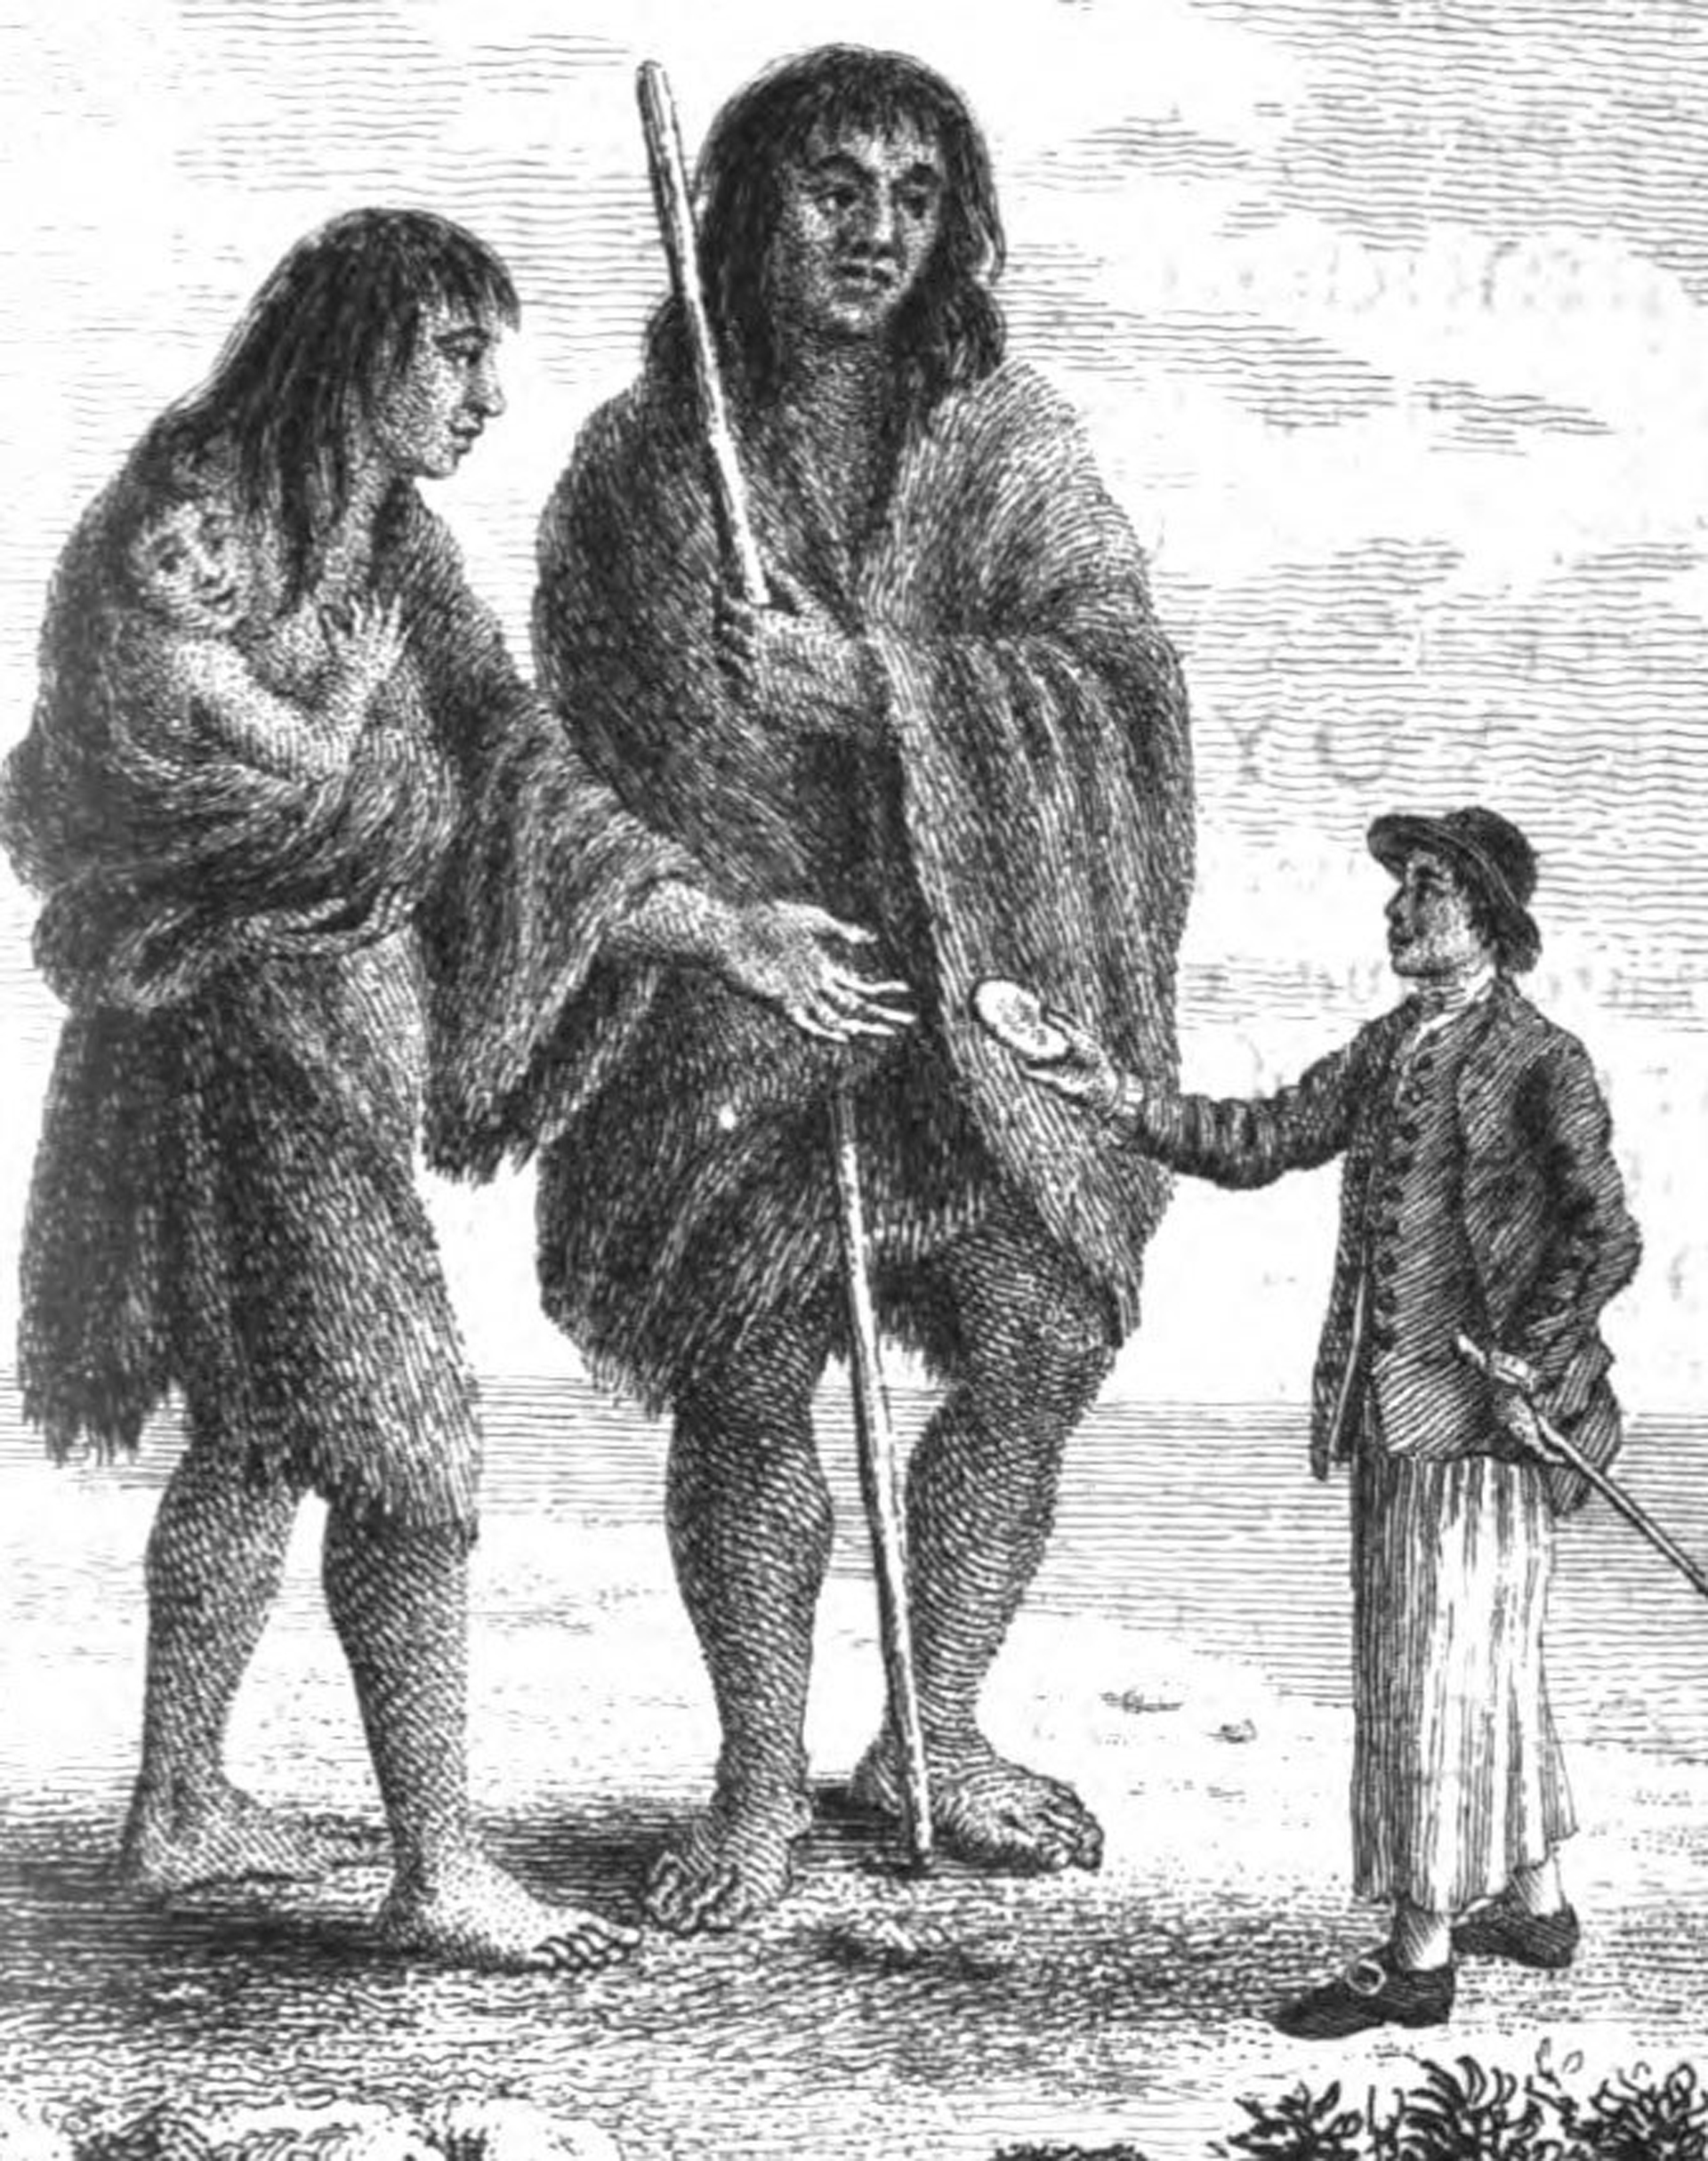 This is how the Europeans saw the indigenous people they found in Patagonia